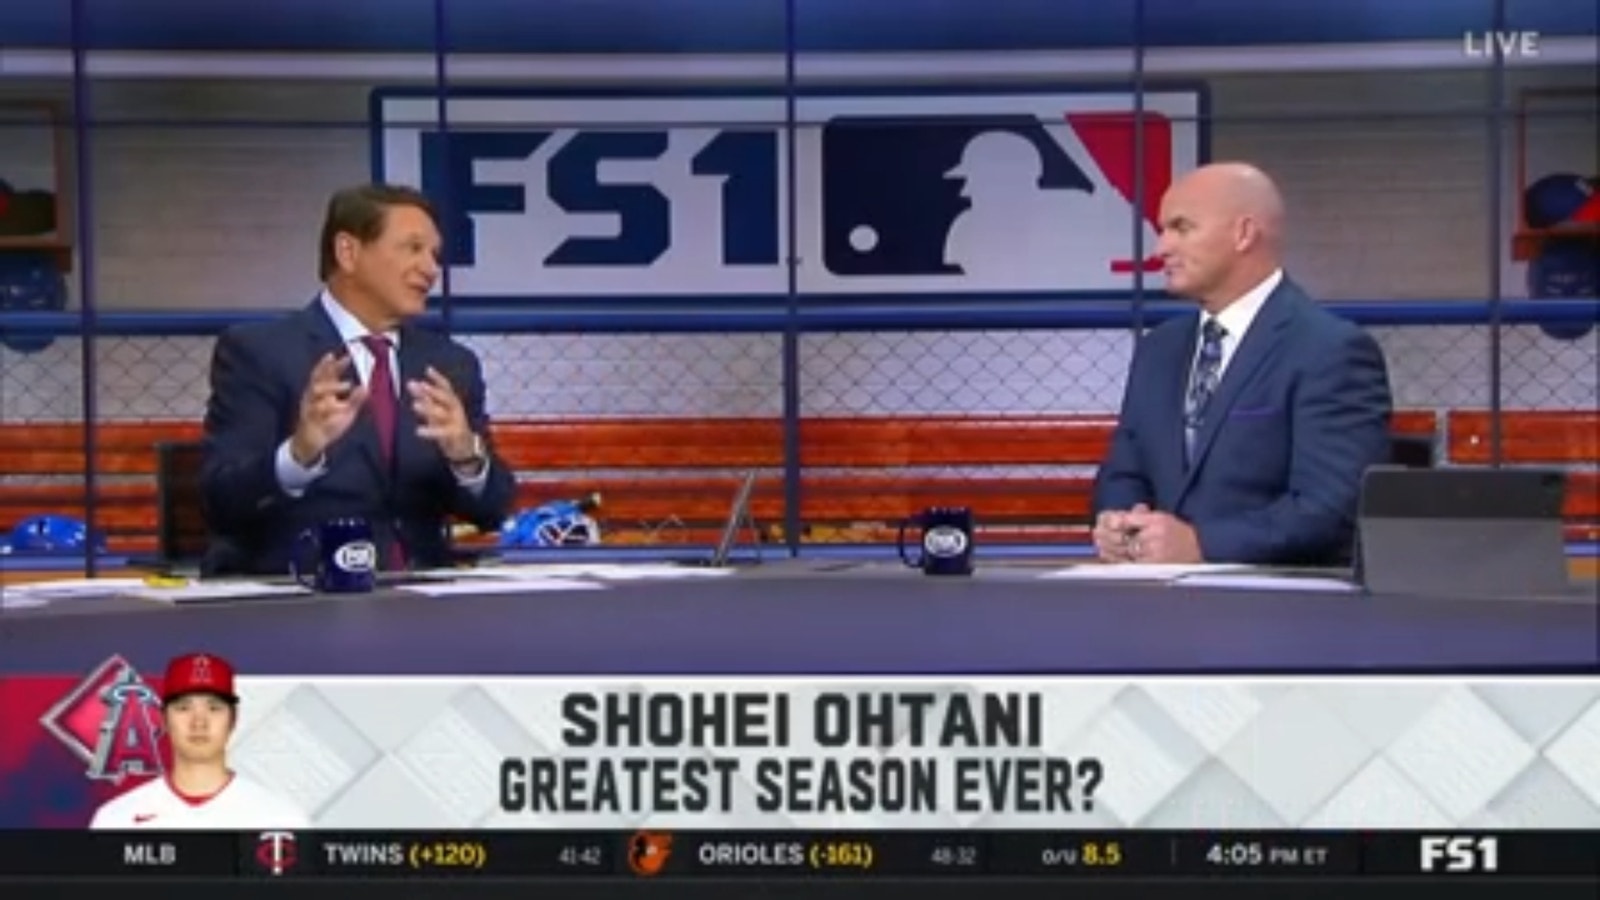 Is Shohei Ohtani's season for Angels the greatest of all time? 